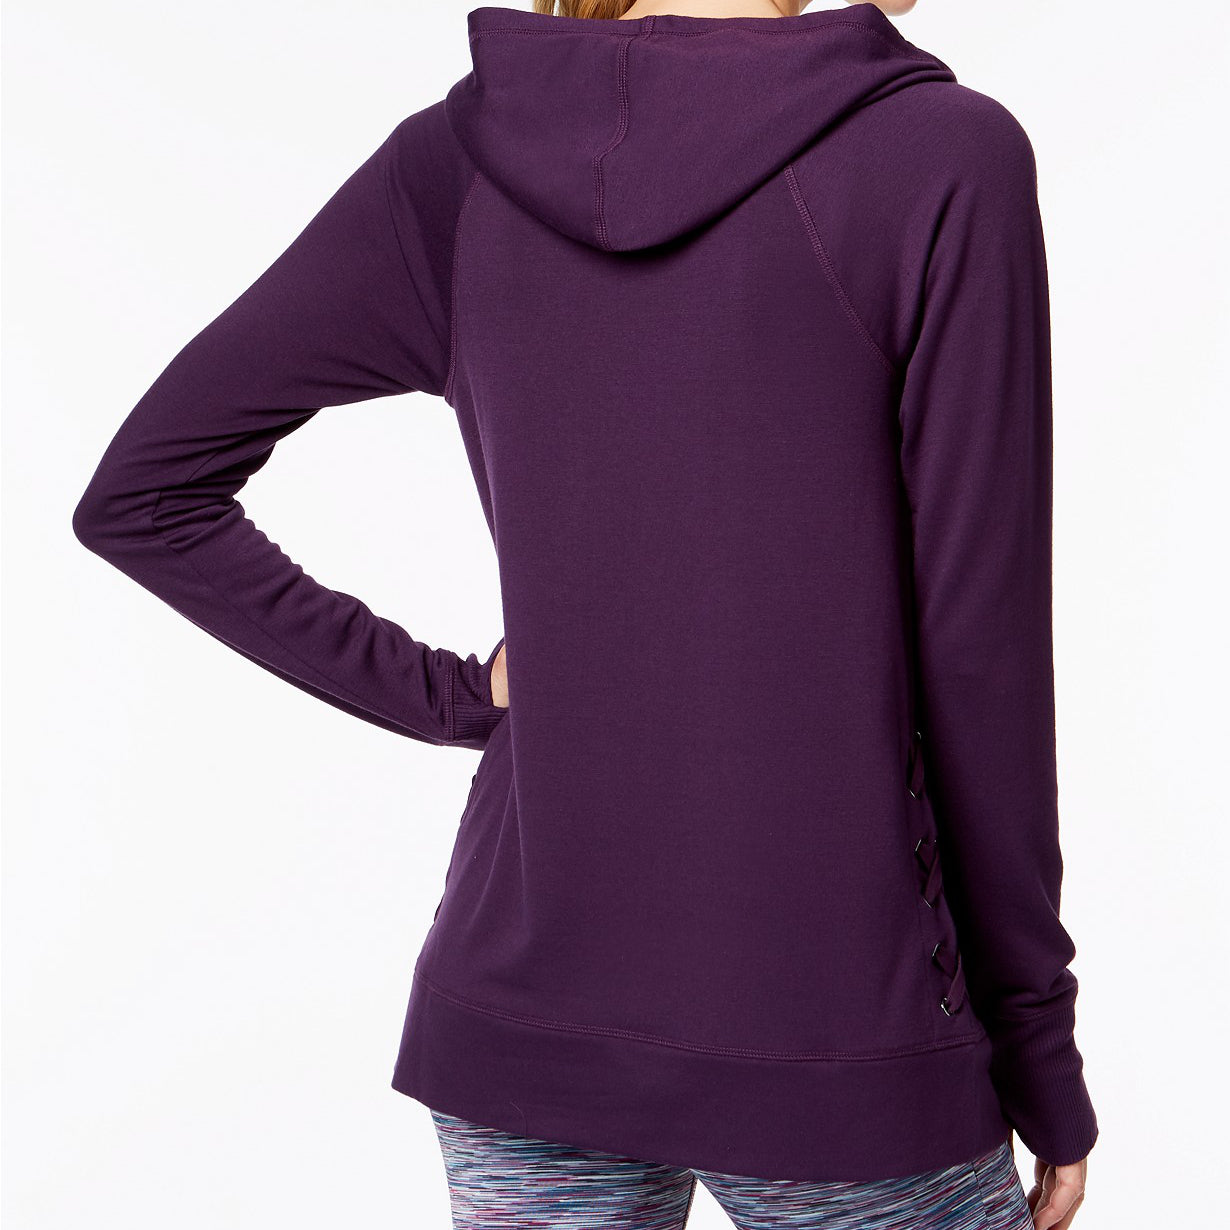 Ideology Womens Lace Up Sides Hoodie